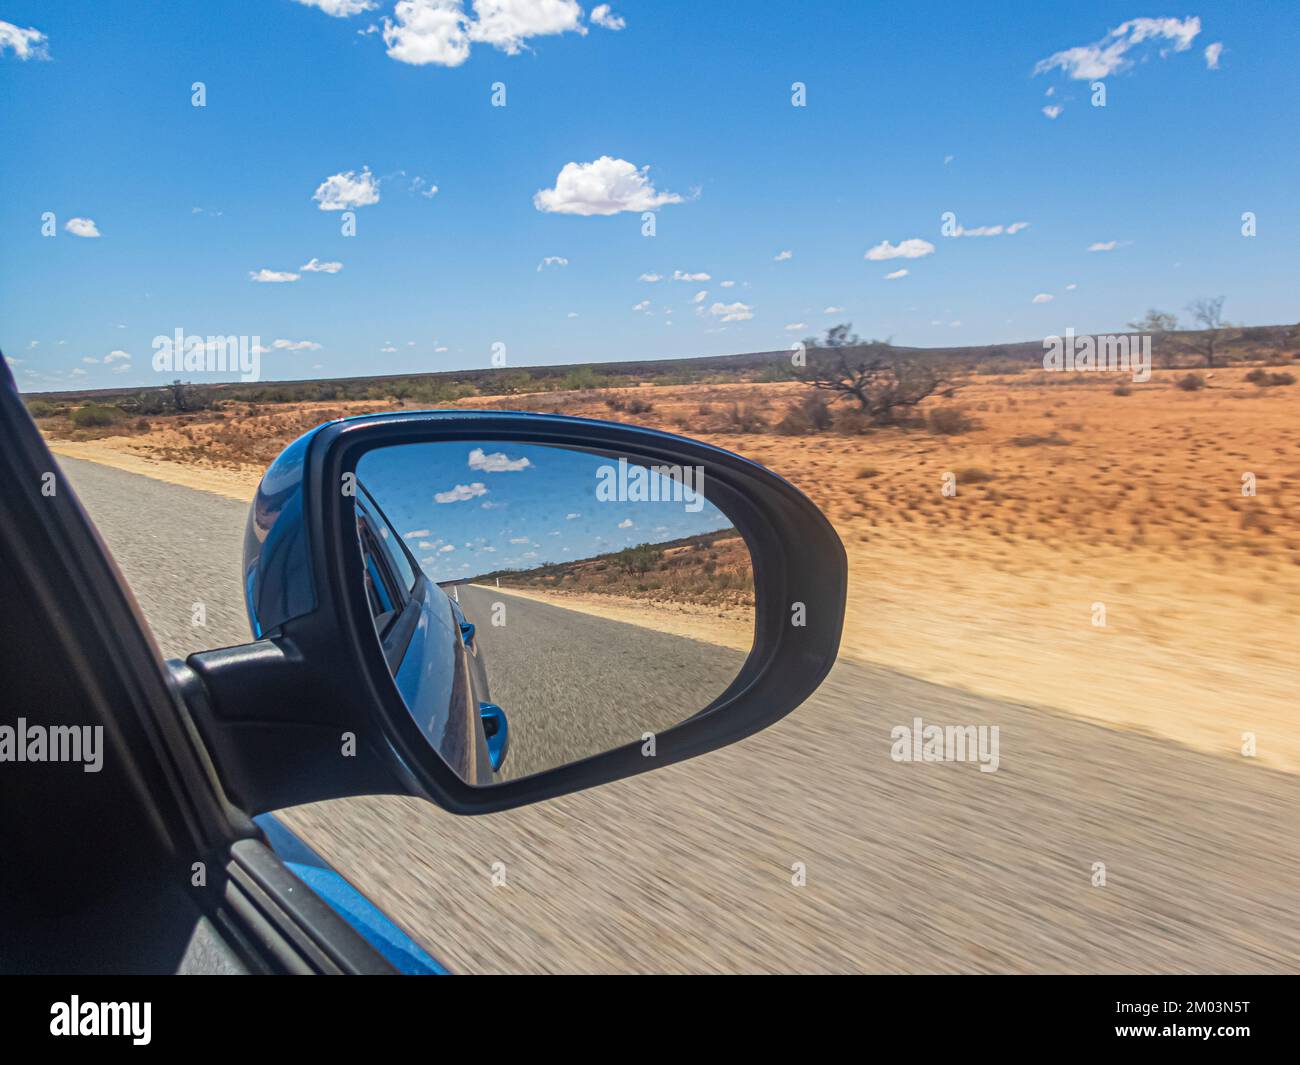 Car's side mirror with reflection against desert landscape along Coral Coast Highway in Western Australia, Australia. Stock Photo